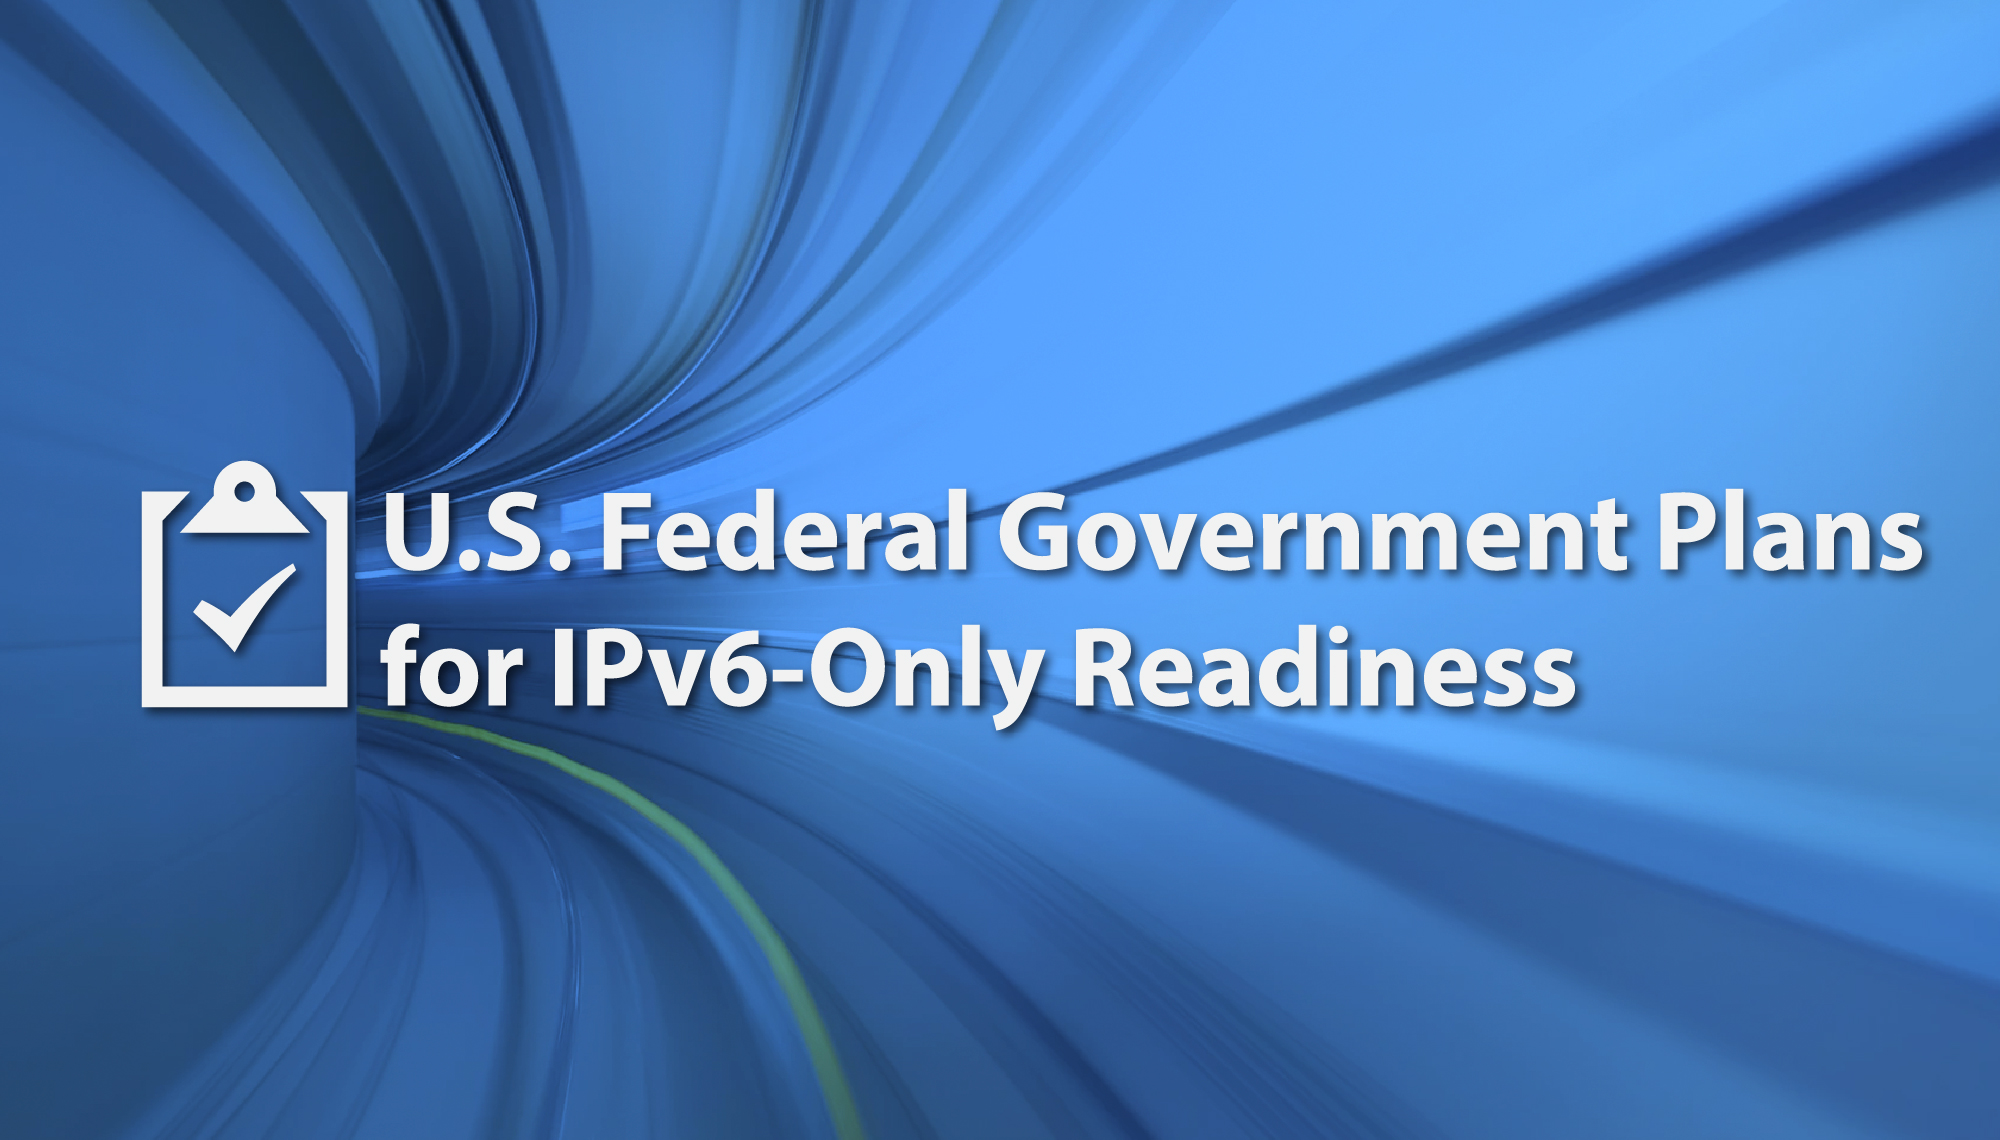 U.S. Federal Government Plans for IPv6-Only Readiness